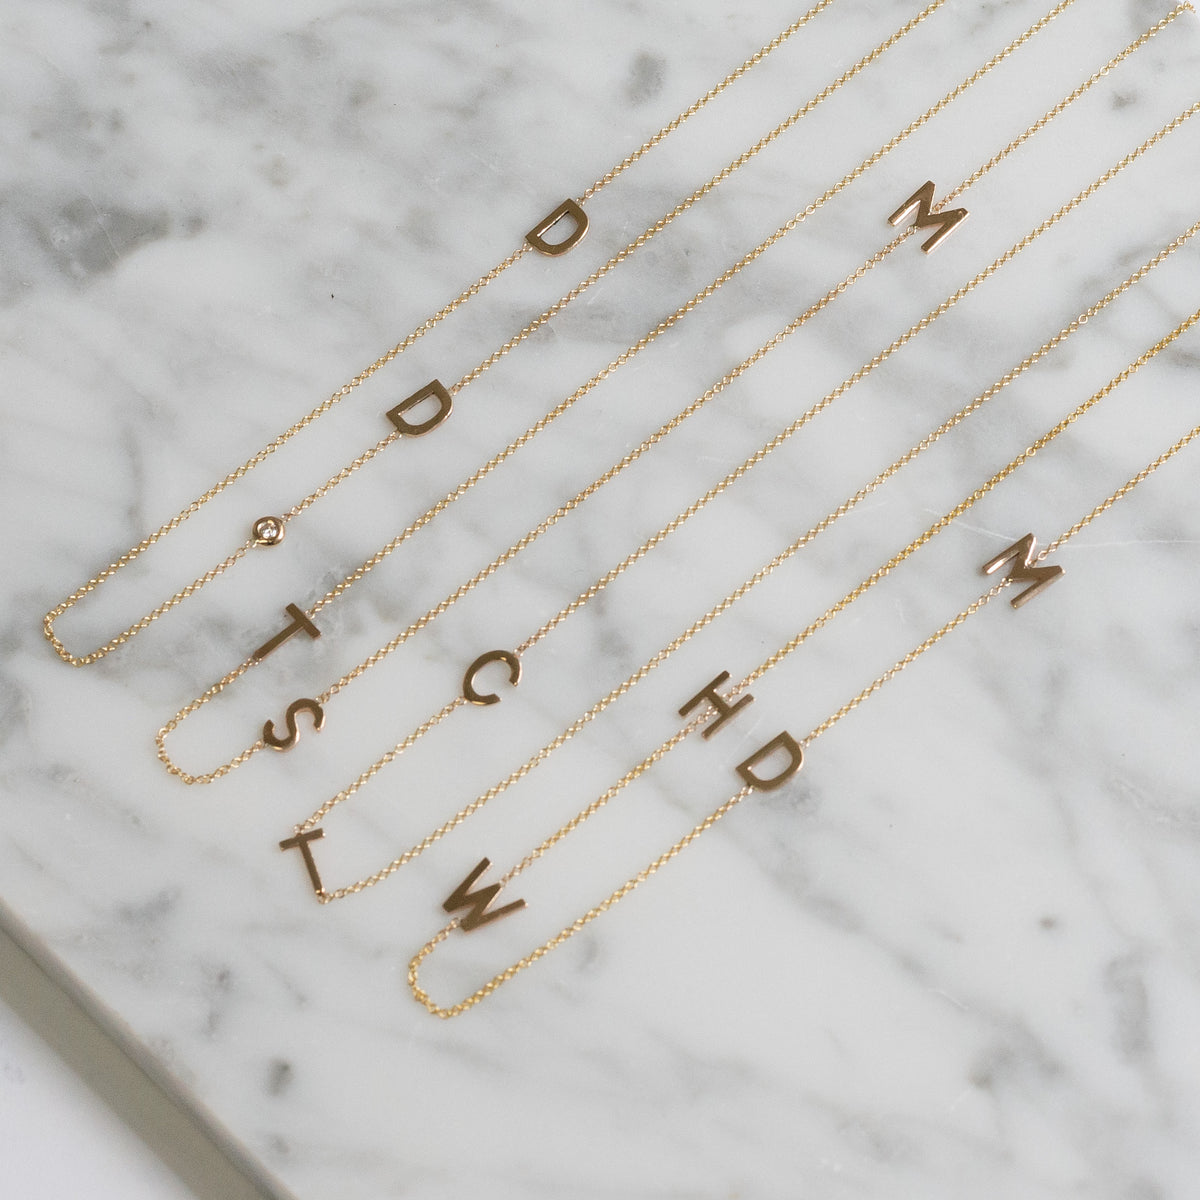 Asymmetrical Initial Necklaces in 14k Yellow